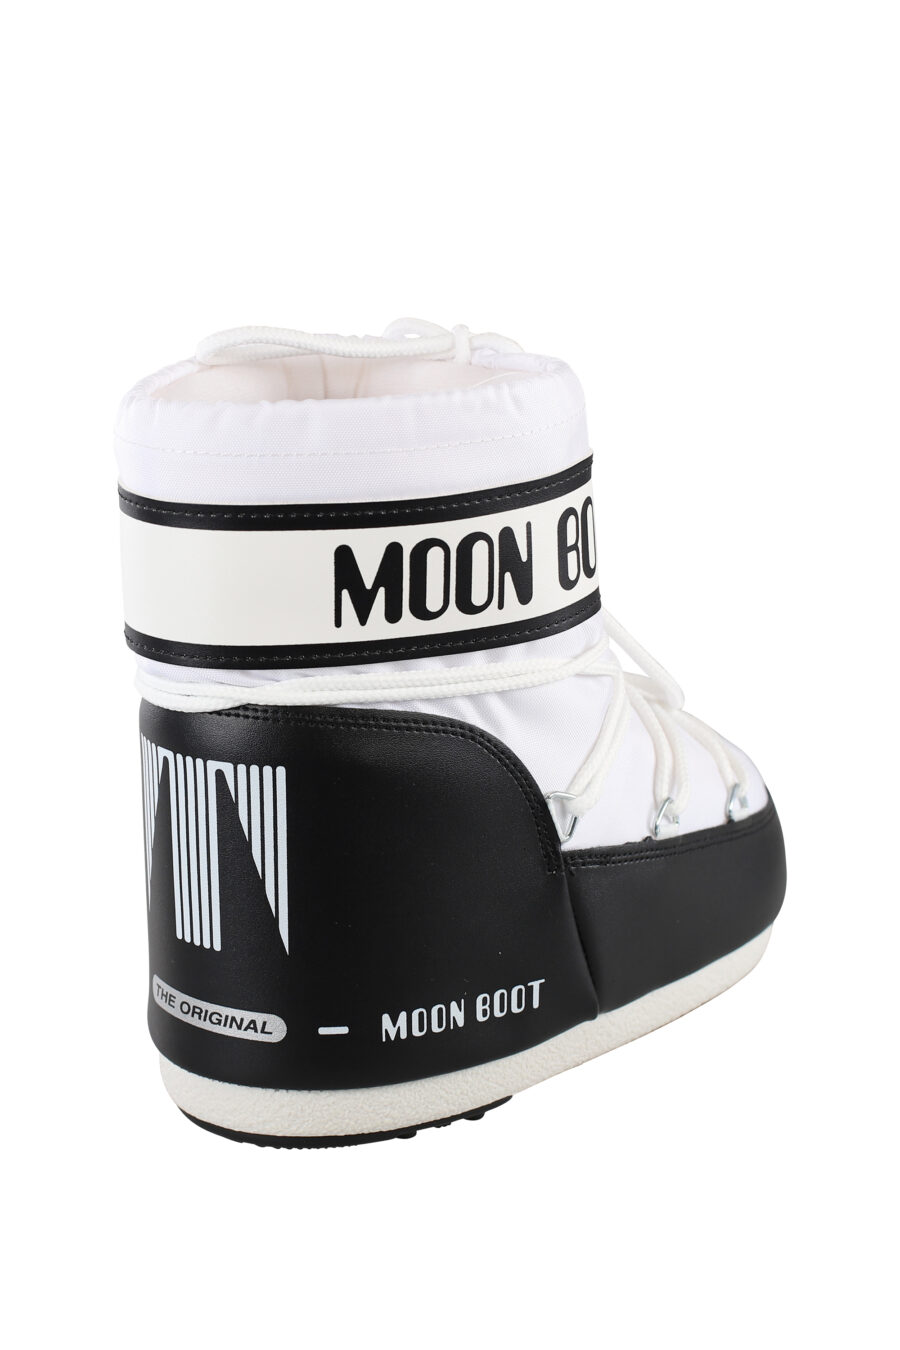 Two-tone black and white snow boots with black logo - IMG 6741